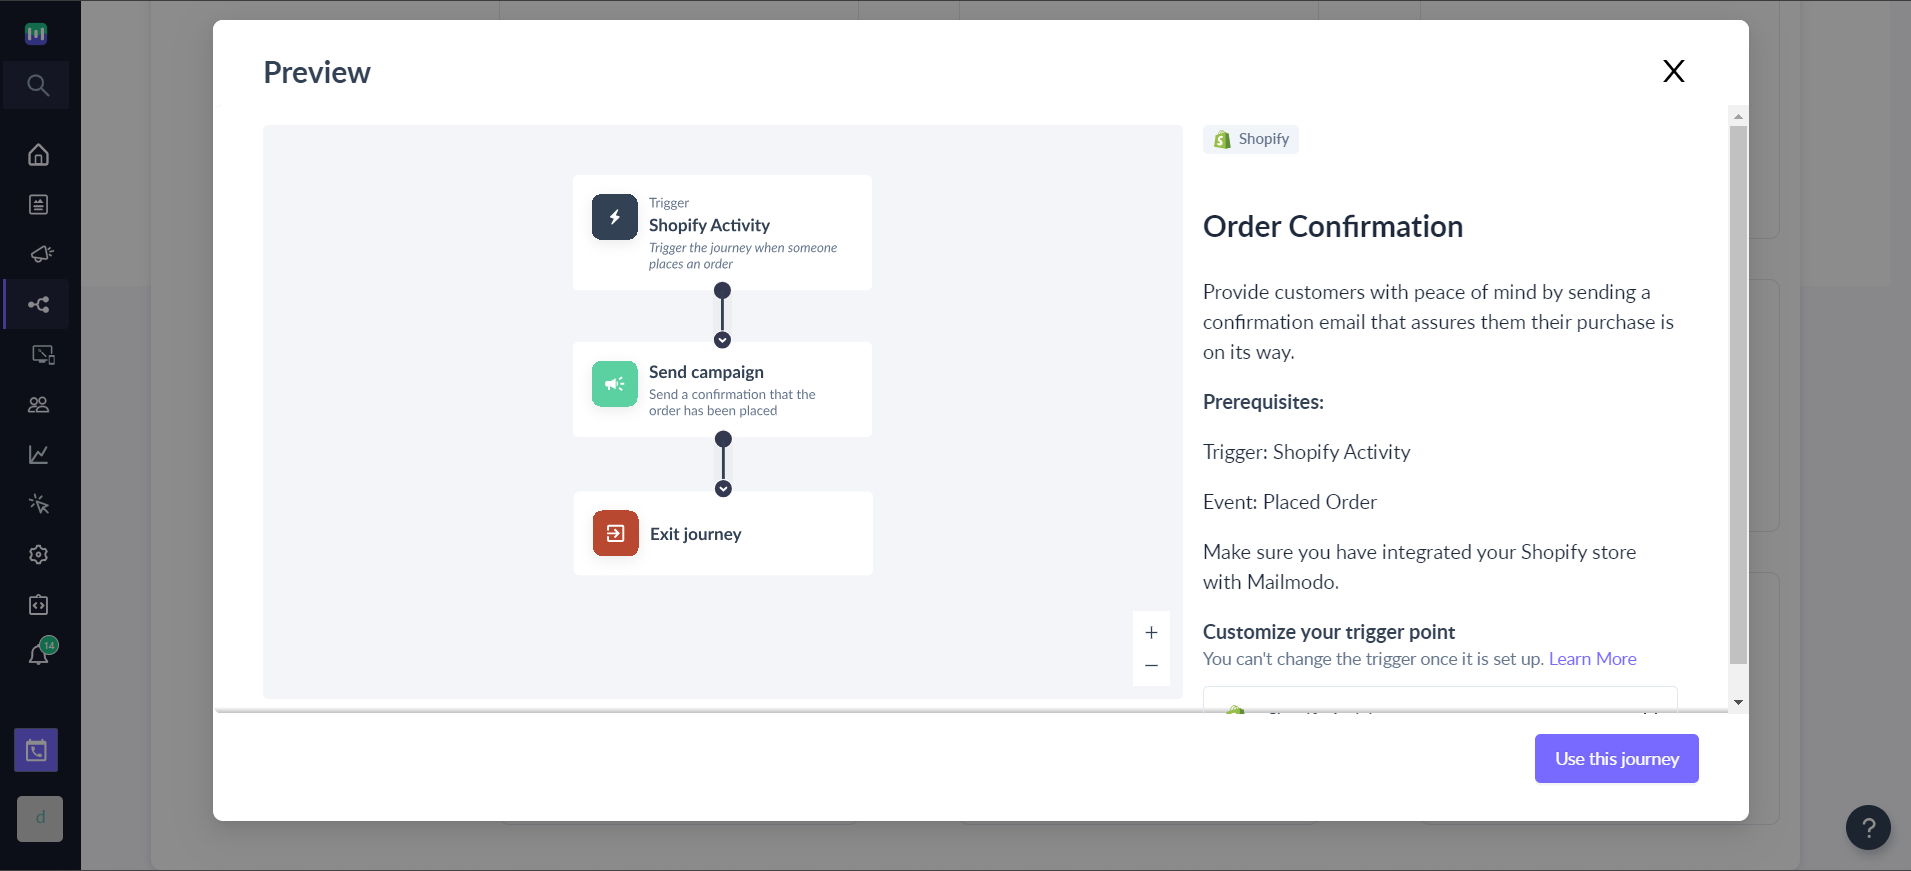 How to Send an Shopify Order Confirmation Campaign